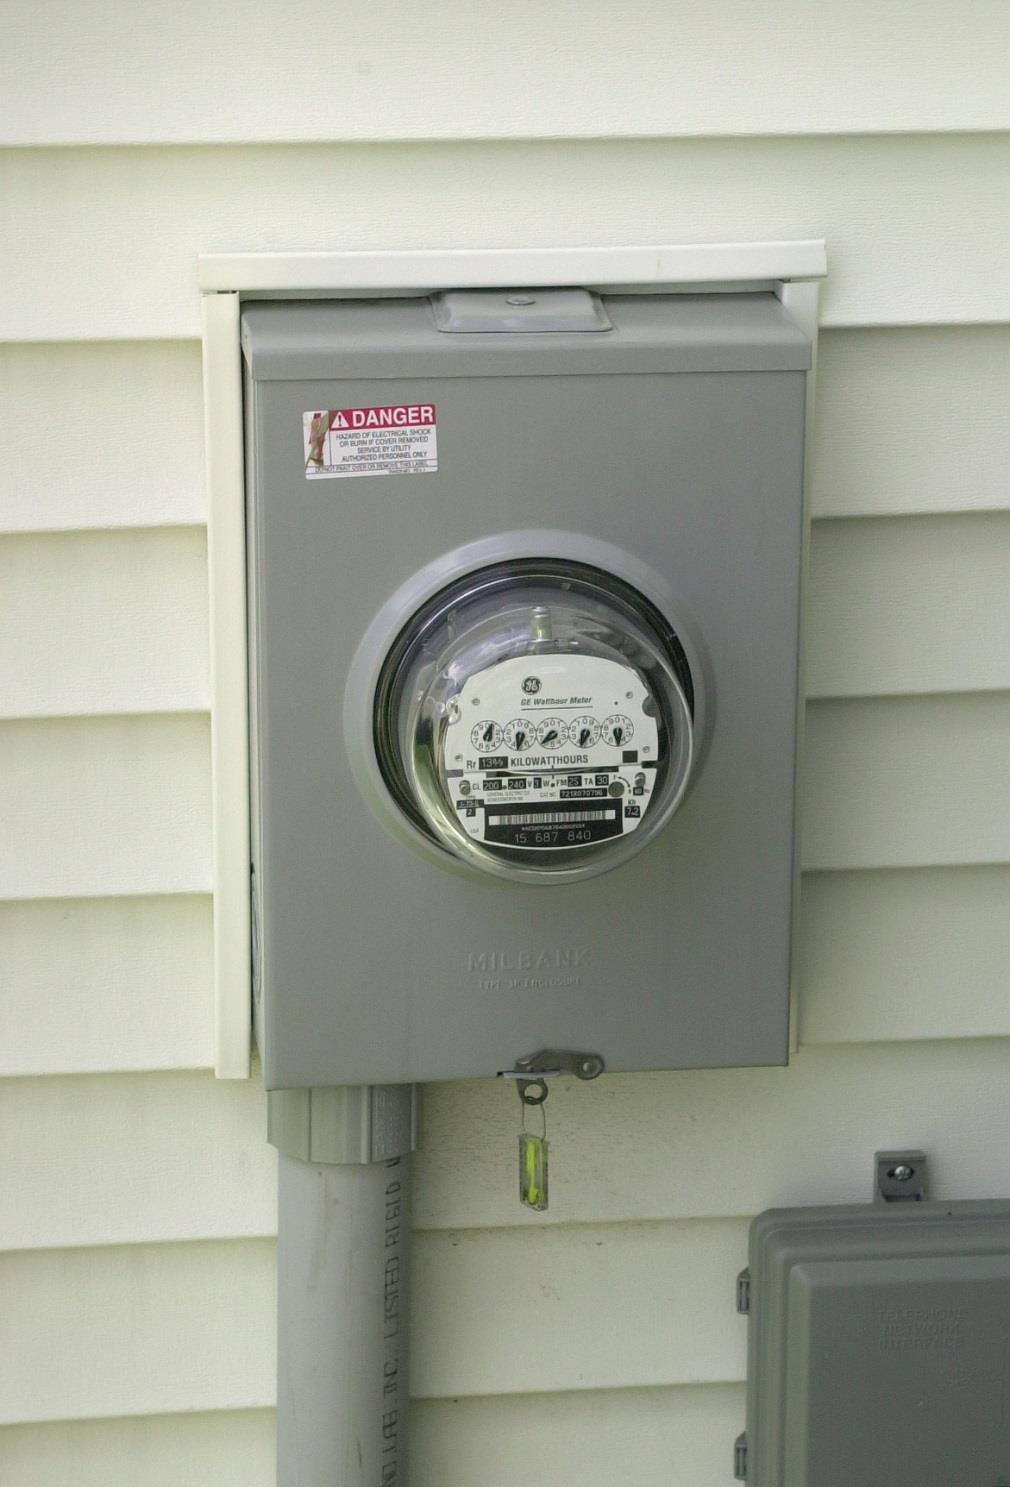 Electricity enters your house through the electric meter.